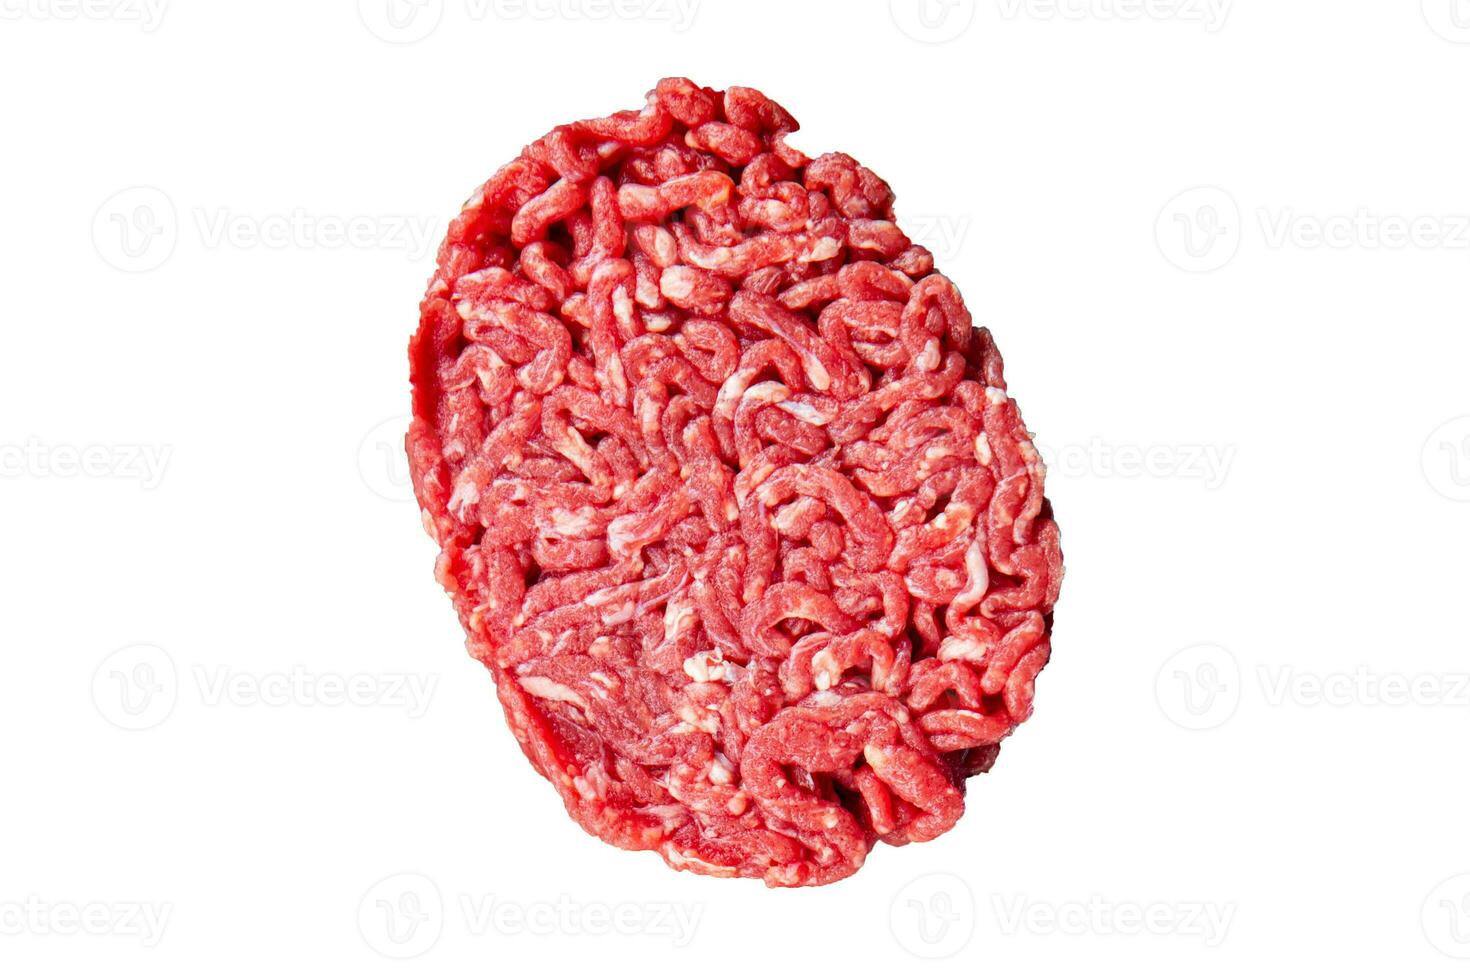 raw cutlet beef fresh meat hamburger cooking meal food snack on the table copy space food background rustic top view photo